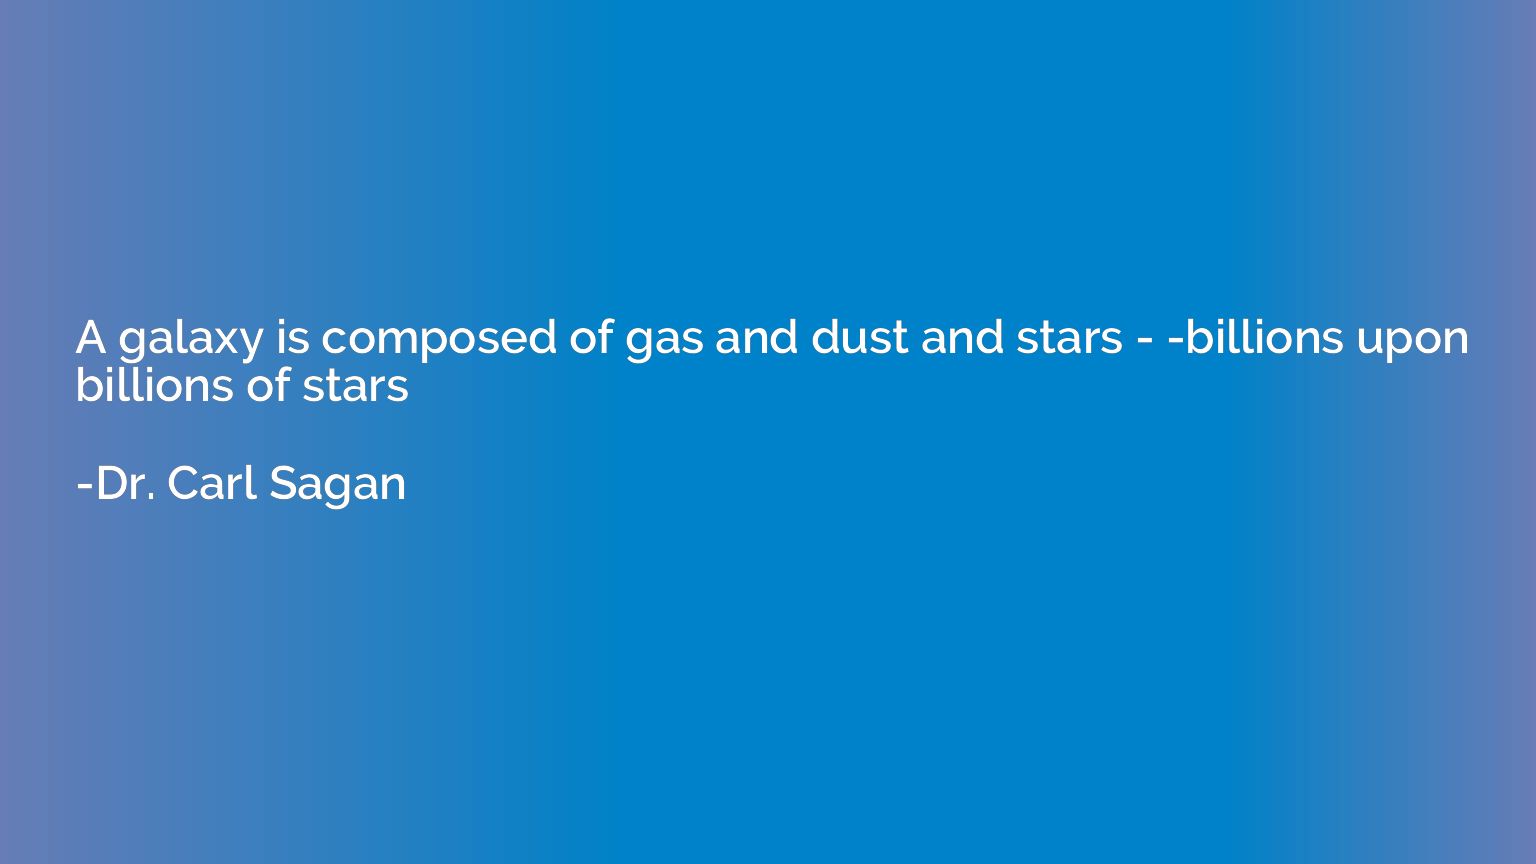 A galaxy is composed of gas and dust and stars - -billions u